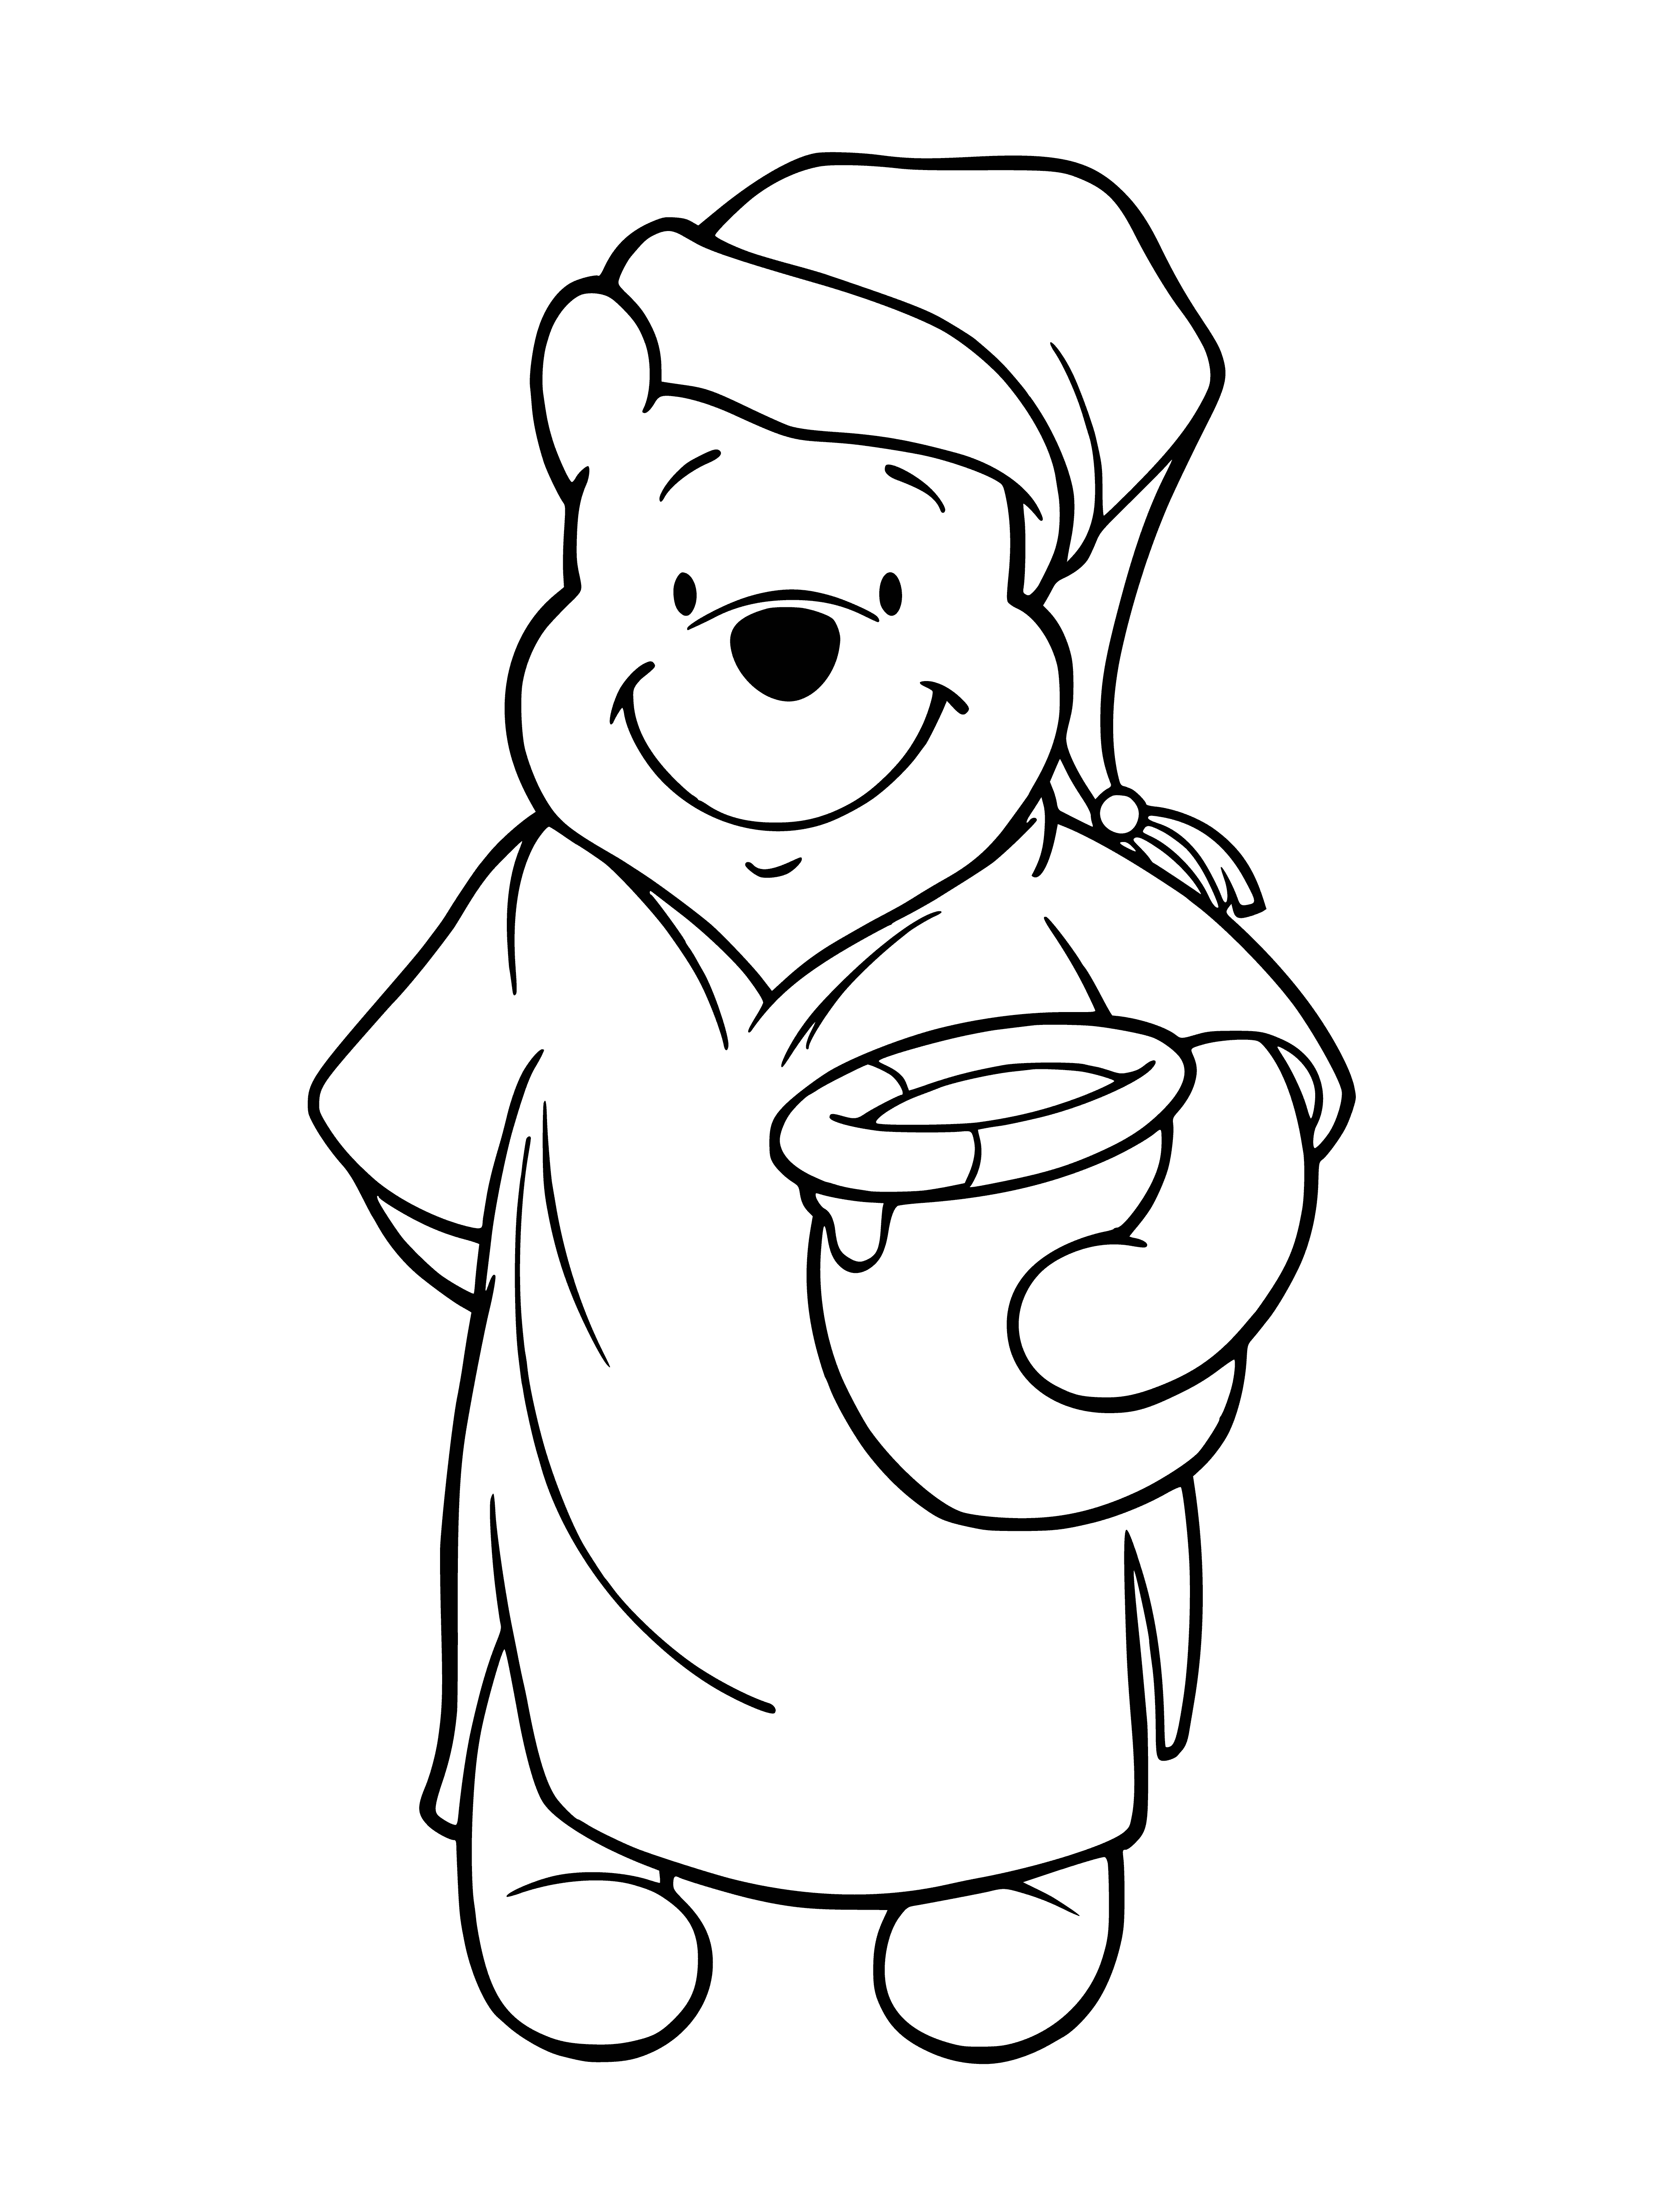 coloring page: A brown bear with a yellow belly and red shorts holds a pot of honey. He's smiling and has big, furry ears and a stubby tail. #bear #honeypot